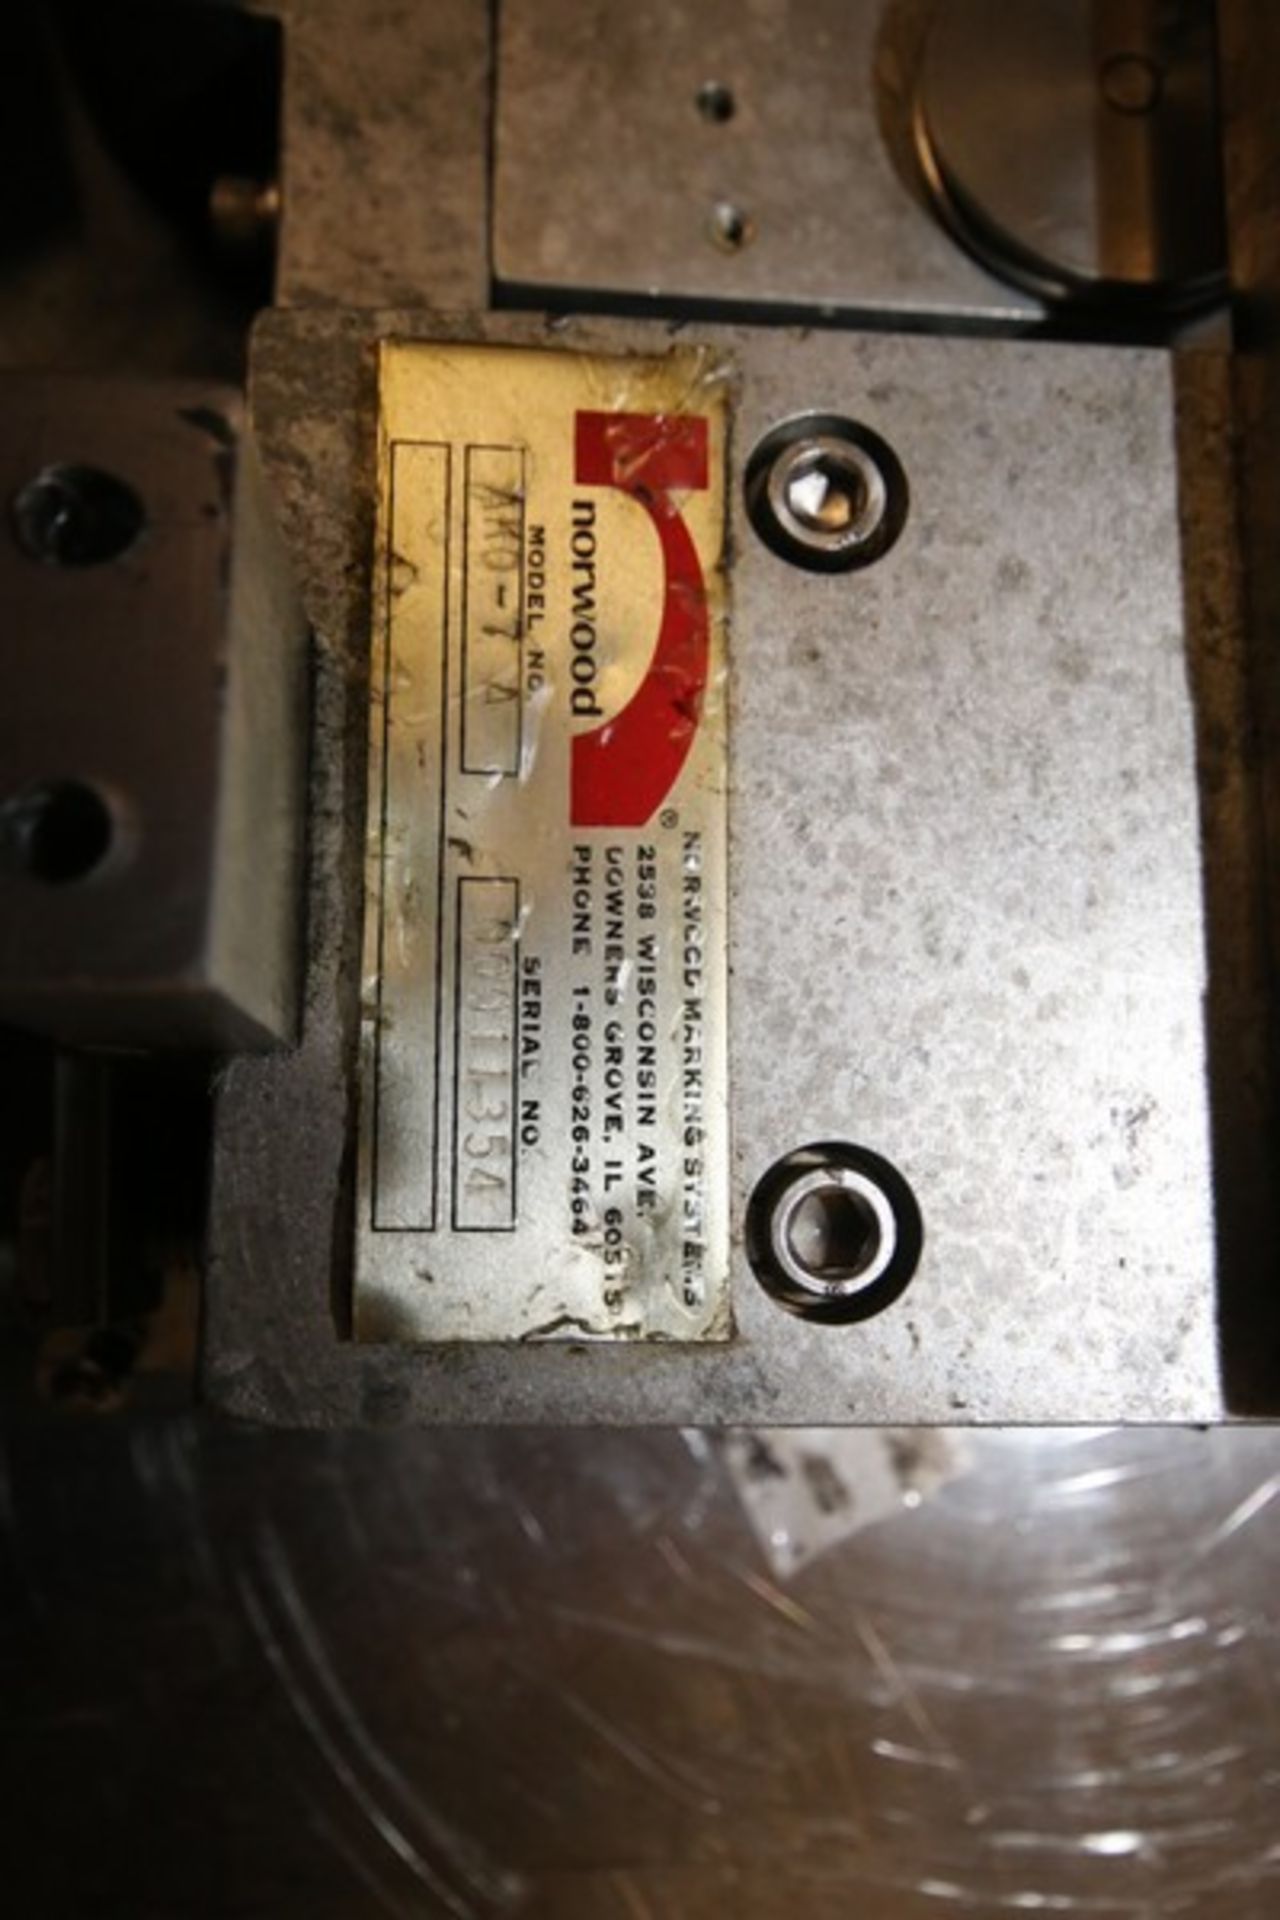 Norwood Carton line Coder, Model AKO-7A, SN 00011354 (INV#81506)(Located @ the MDG Auction - Image 3 of 3